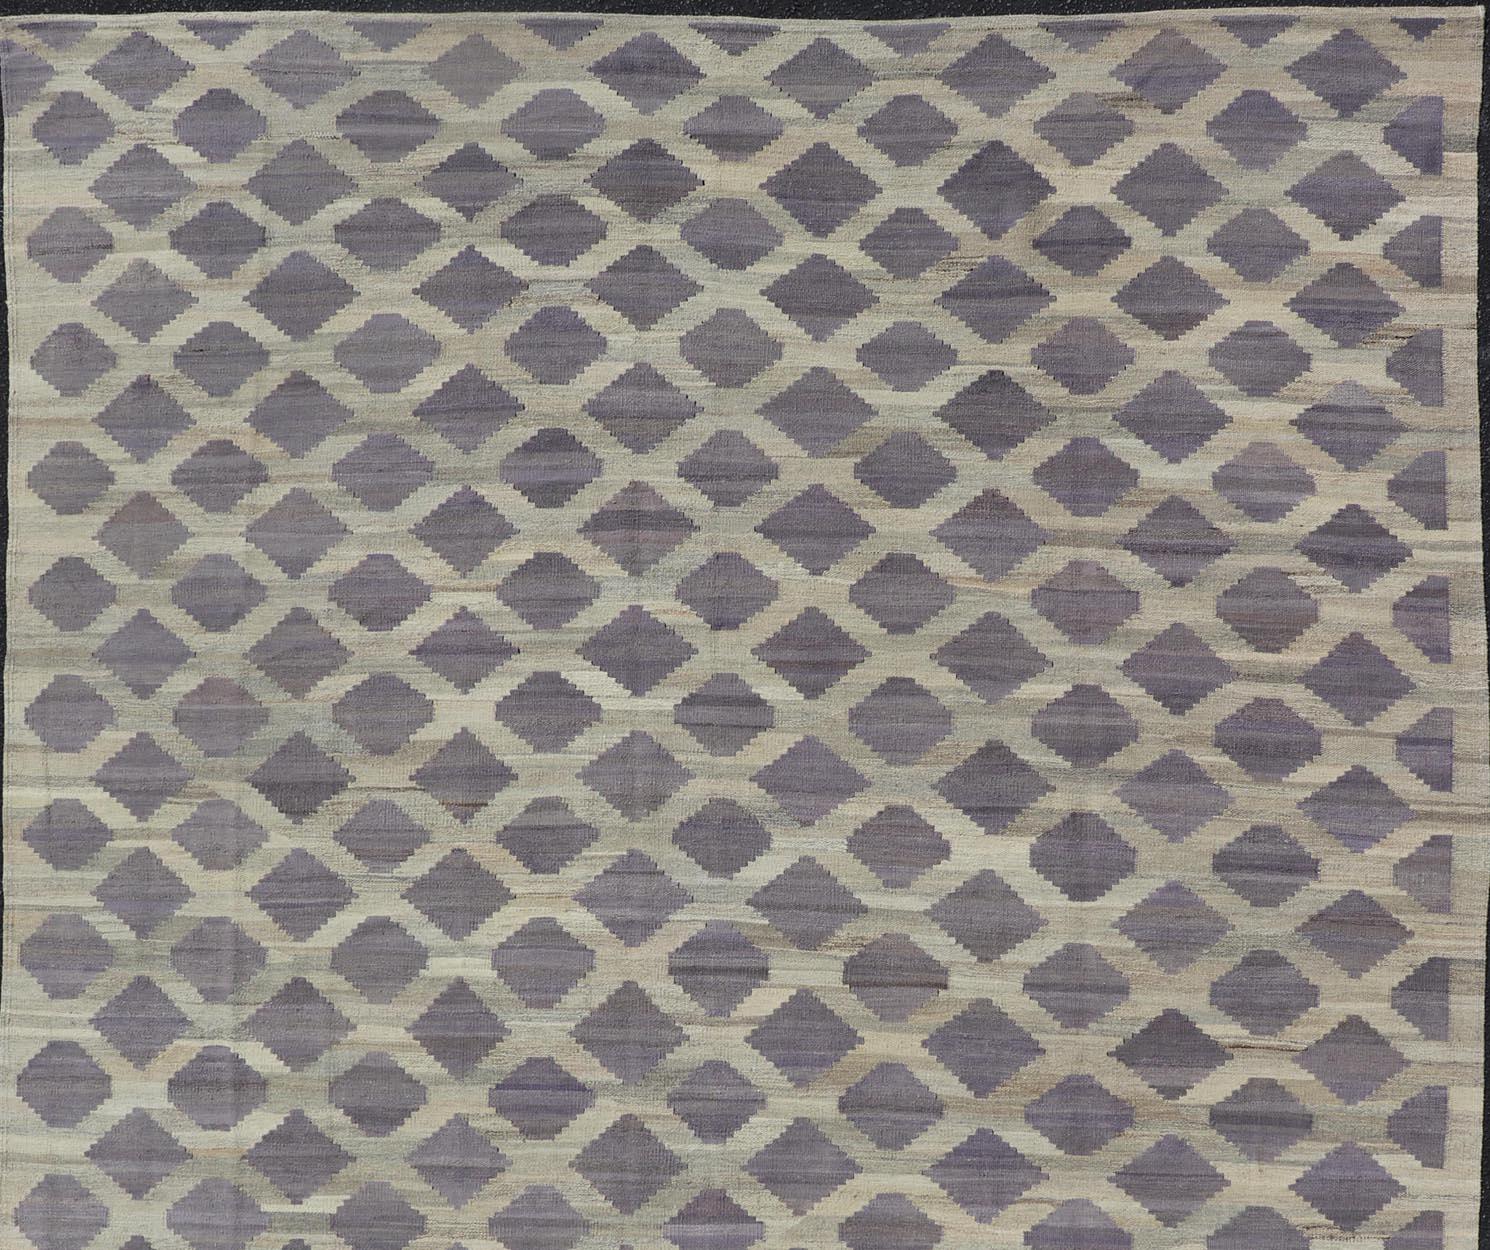 This flat-weave kilim has been hand-woven. The rug features a modern all-over geometric diamond design, rendered in shades of gray, cream and brown; making this rug a superb fit for a variety of classic, modern, casual and minimalist